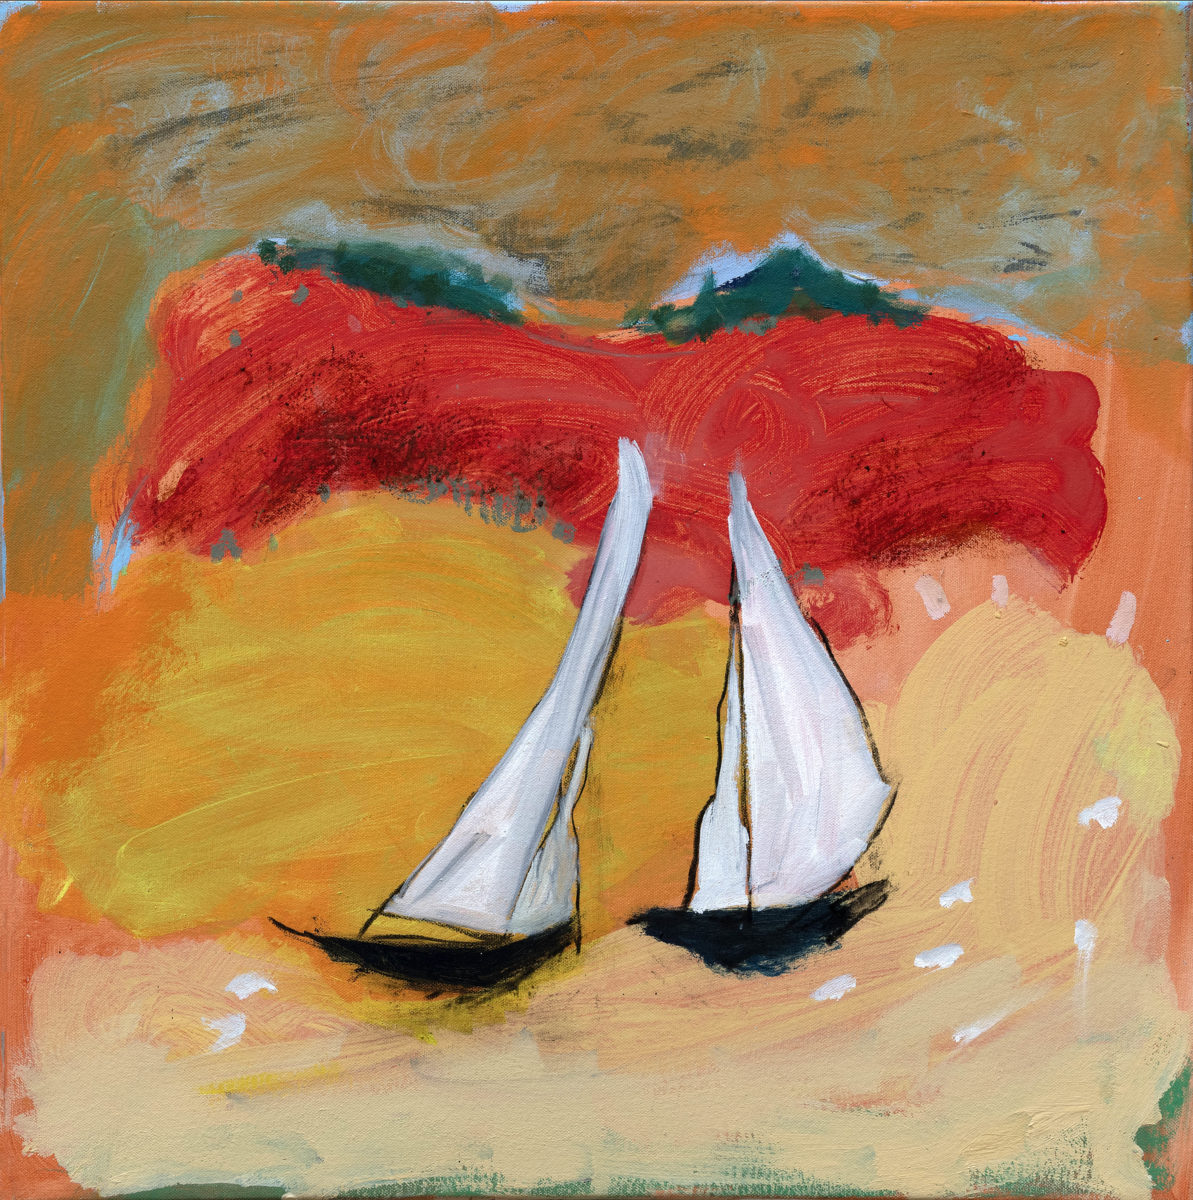 Twin Yachts 2023 | Sue Gill | oil on canvas | 50 x 50 cm | $1500